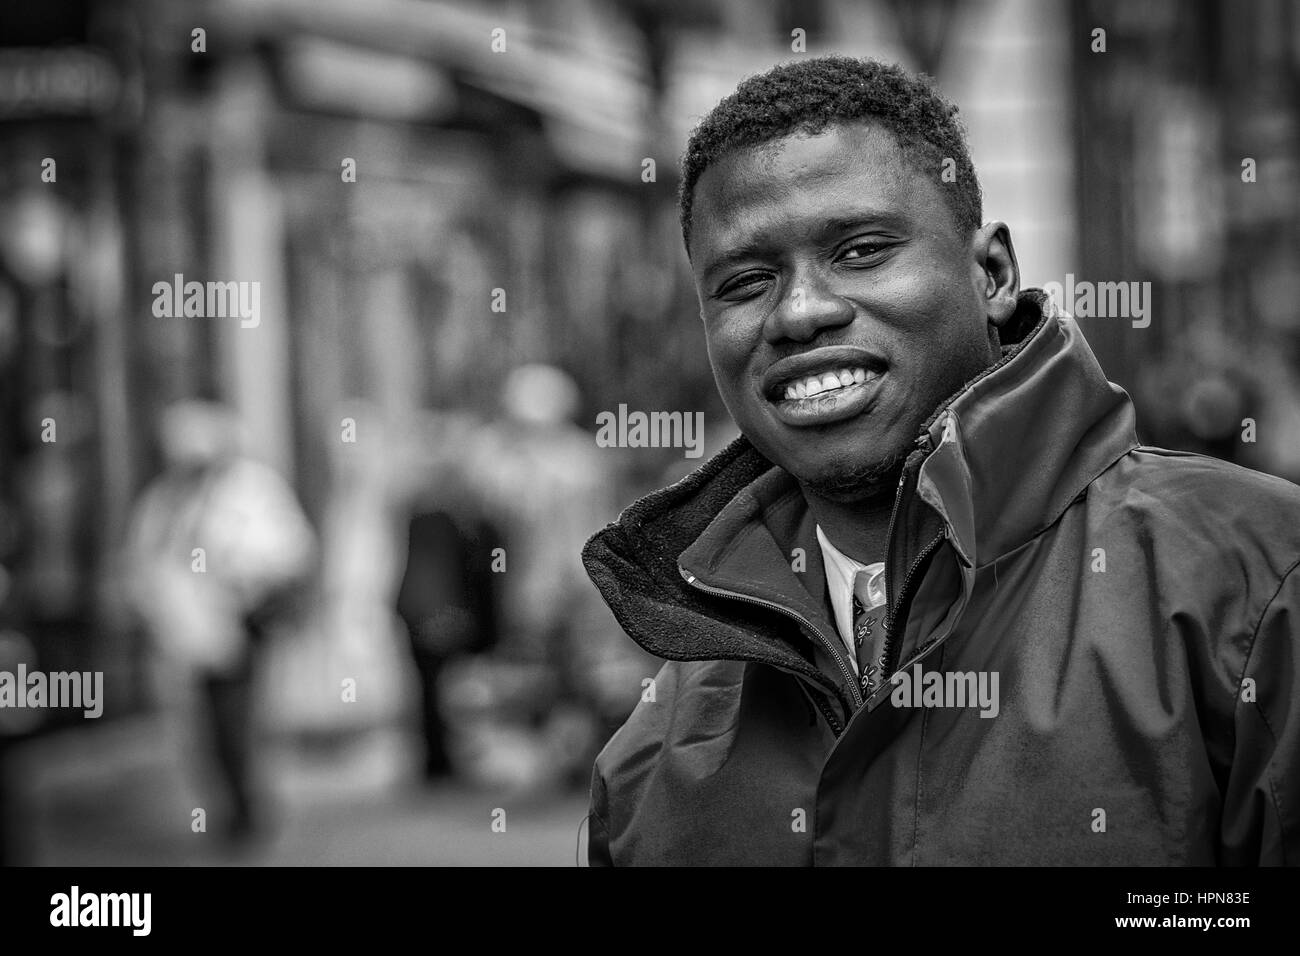 Budapest, Hungary - April  11. 2016: Big guy with a big smile at the street posing in front of camera Stock Photo